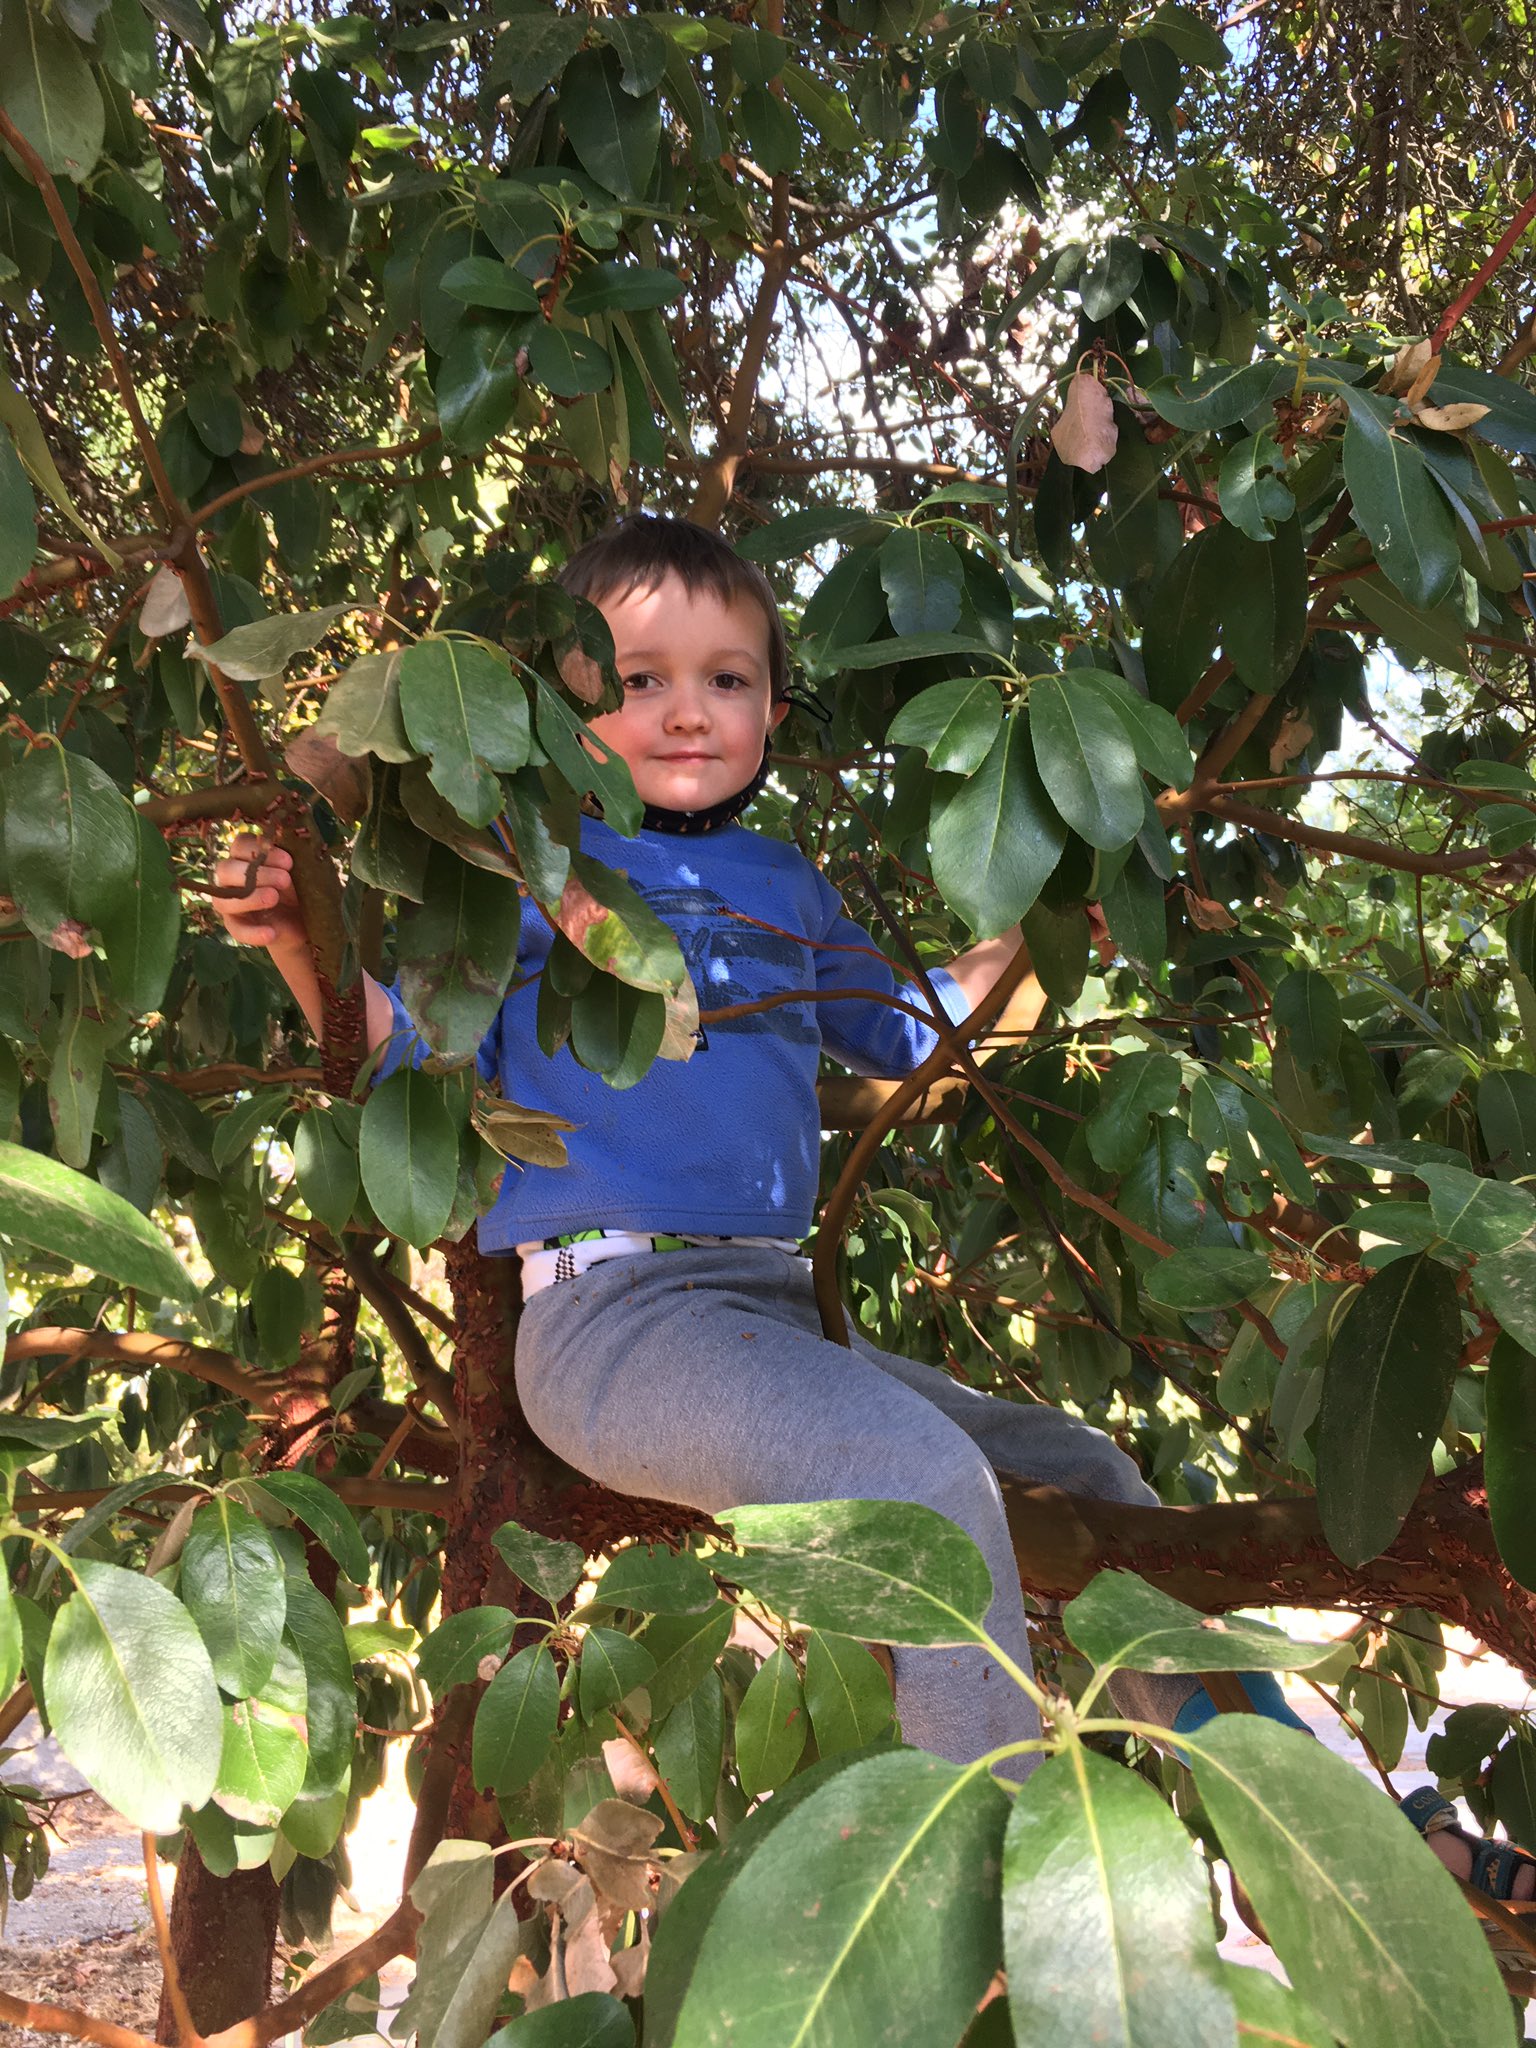 Julian sits in a leafy green tree partially obscured by the leaves.